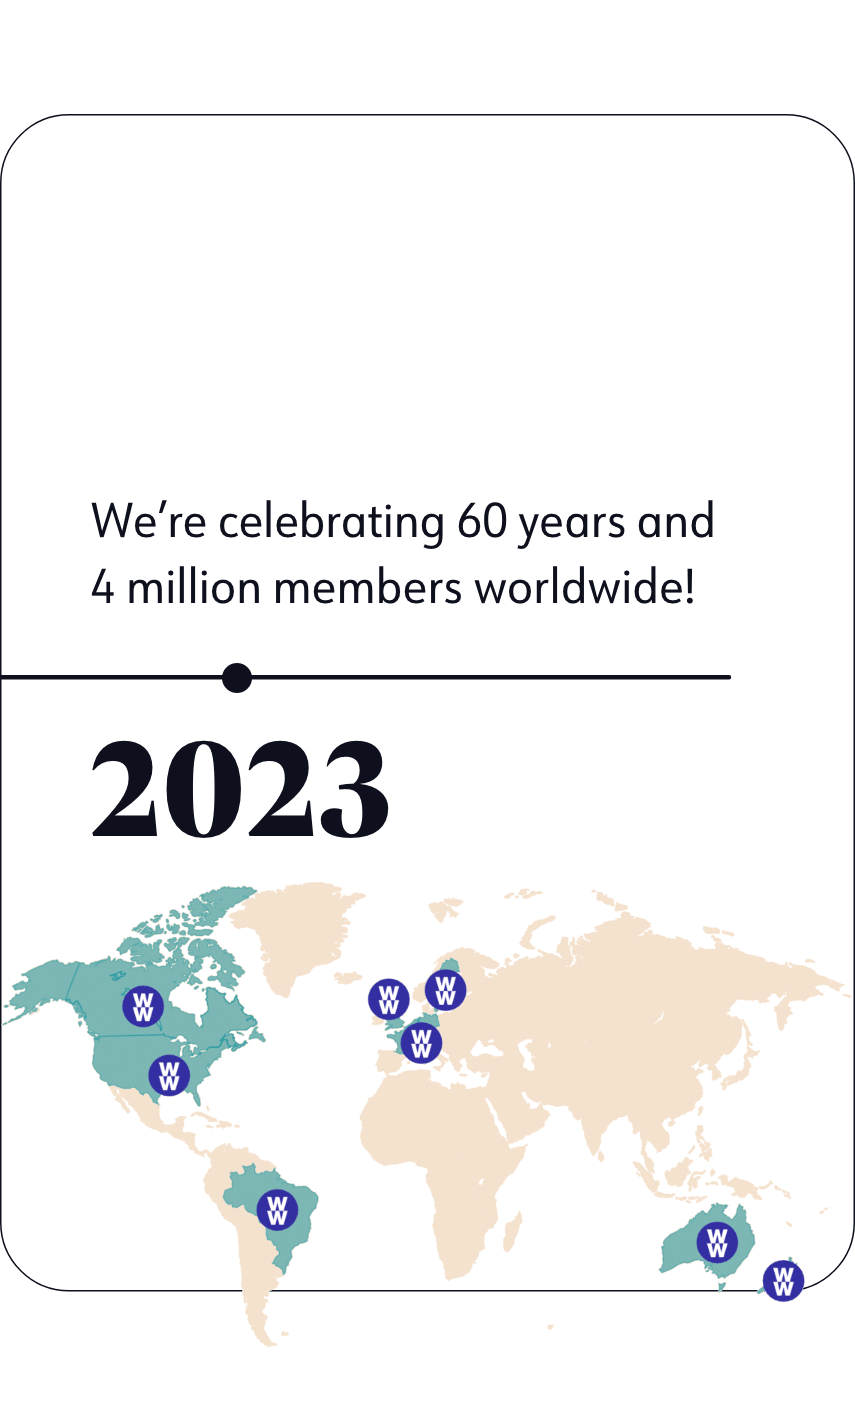 2023: We're celebrating 60 years and 4 million members worldwide!